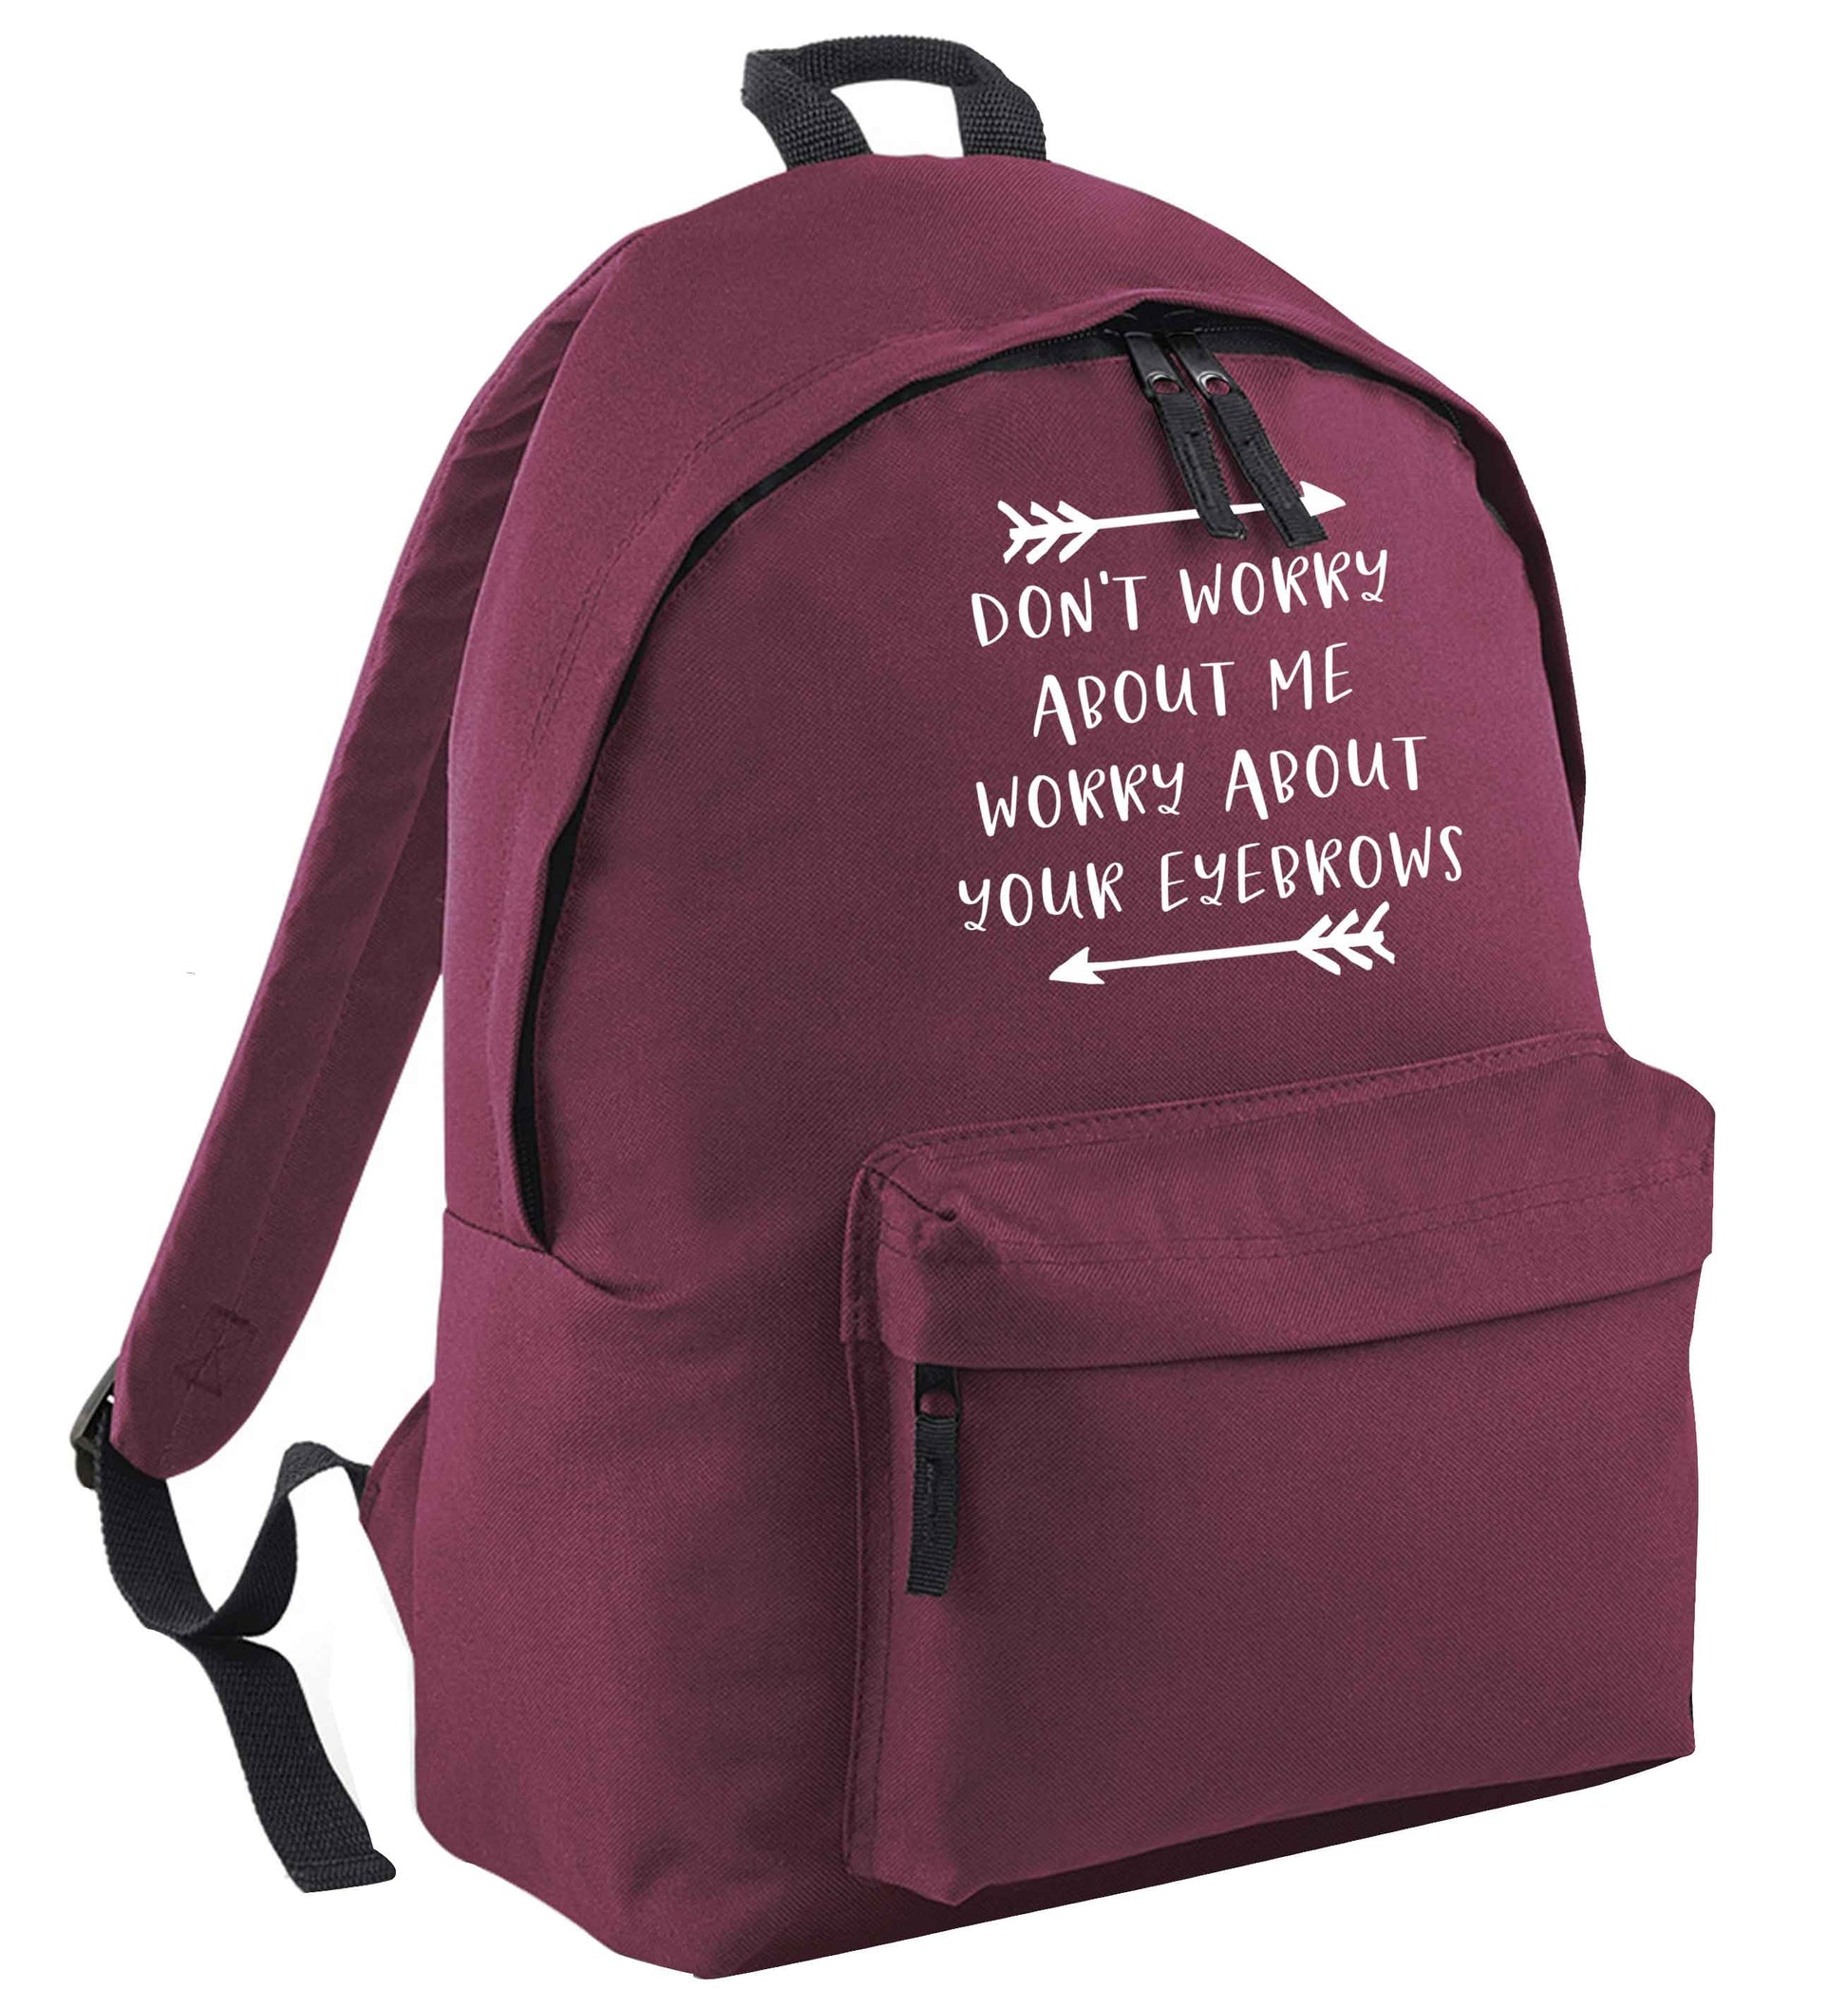 Don't worry about me worry about your eyebrows maroon adults backpack